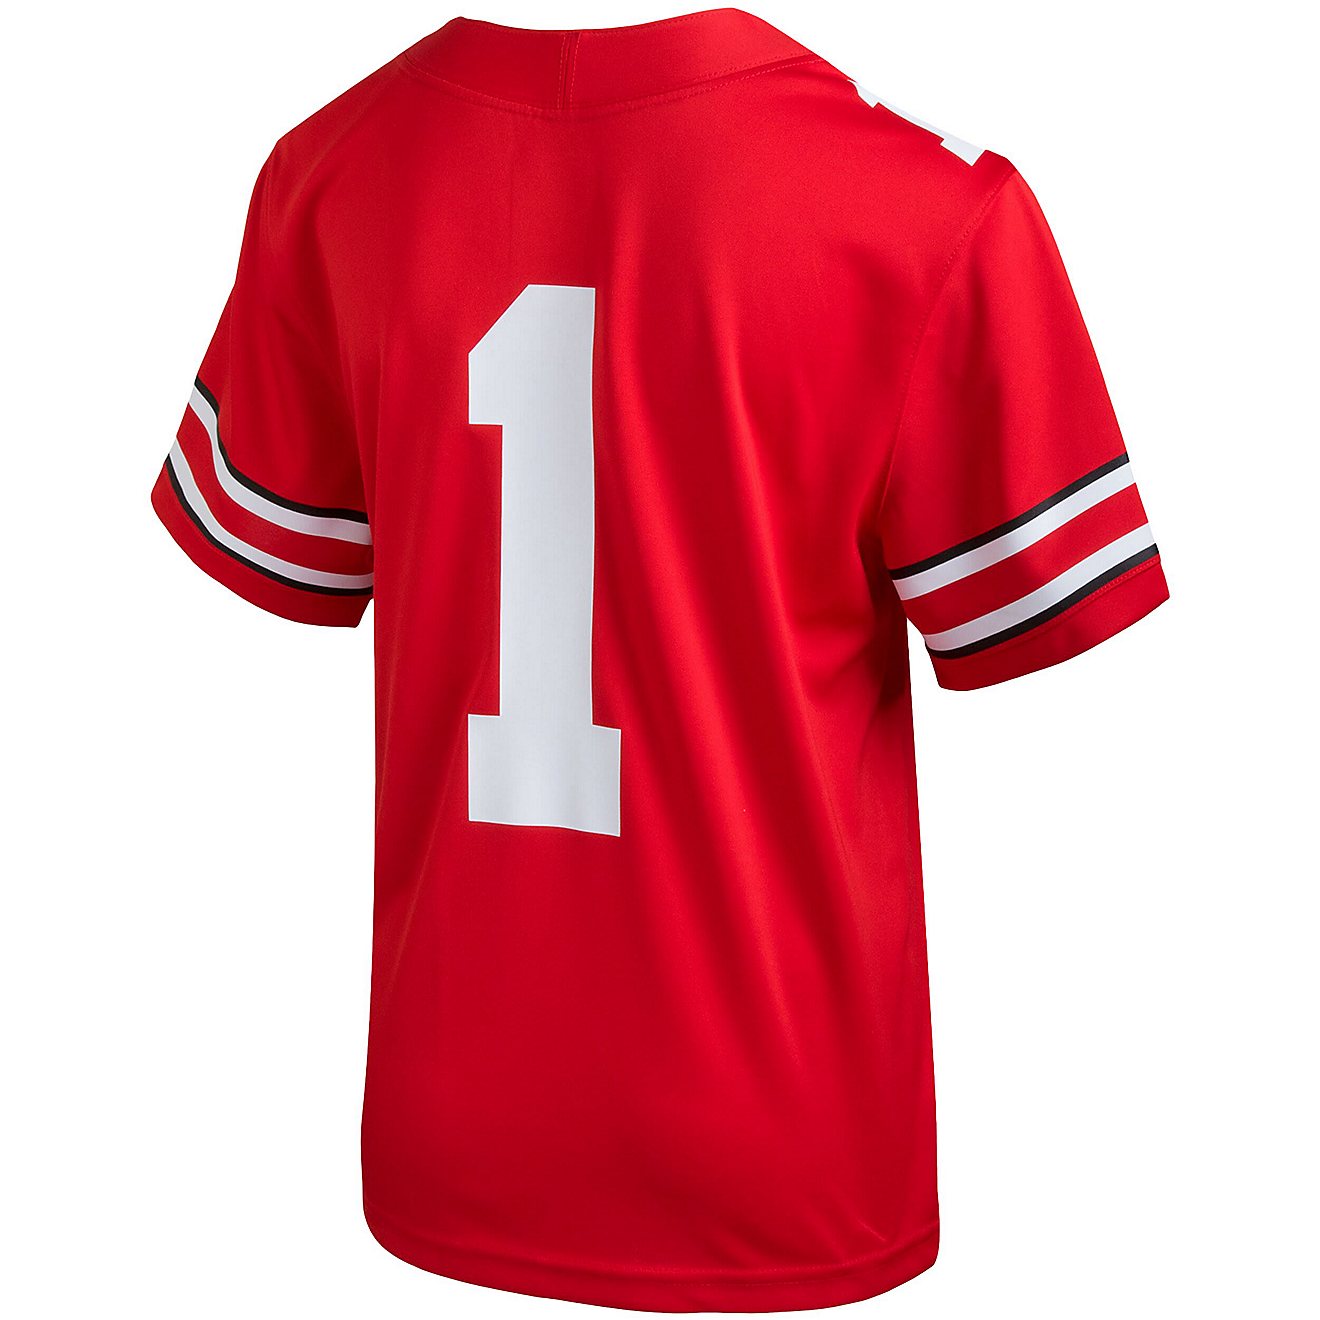 Youth Nike 1 Ohio State Buckeyes Team Replica Football Jersey                                                                    - view number 3